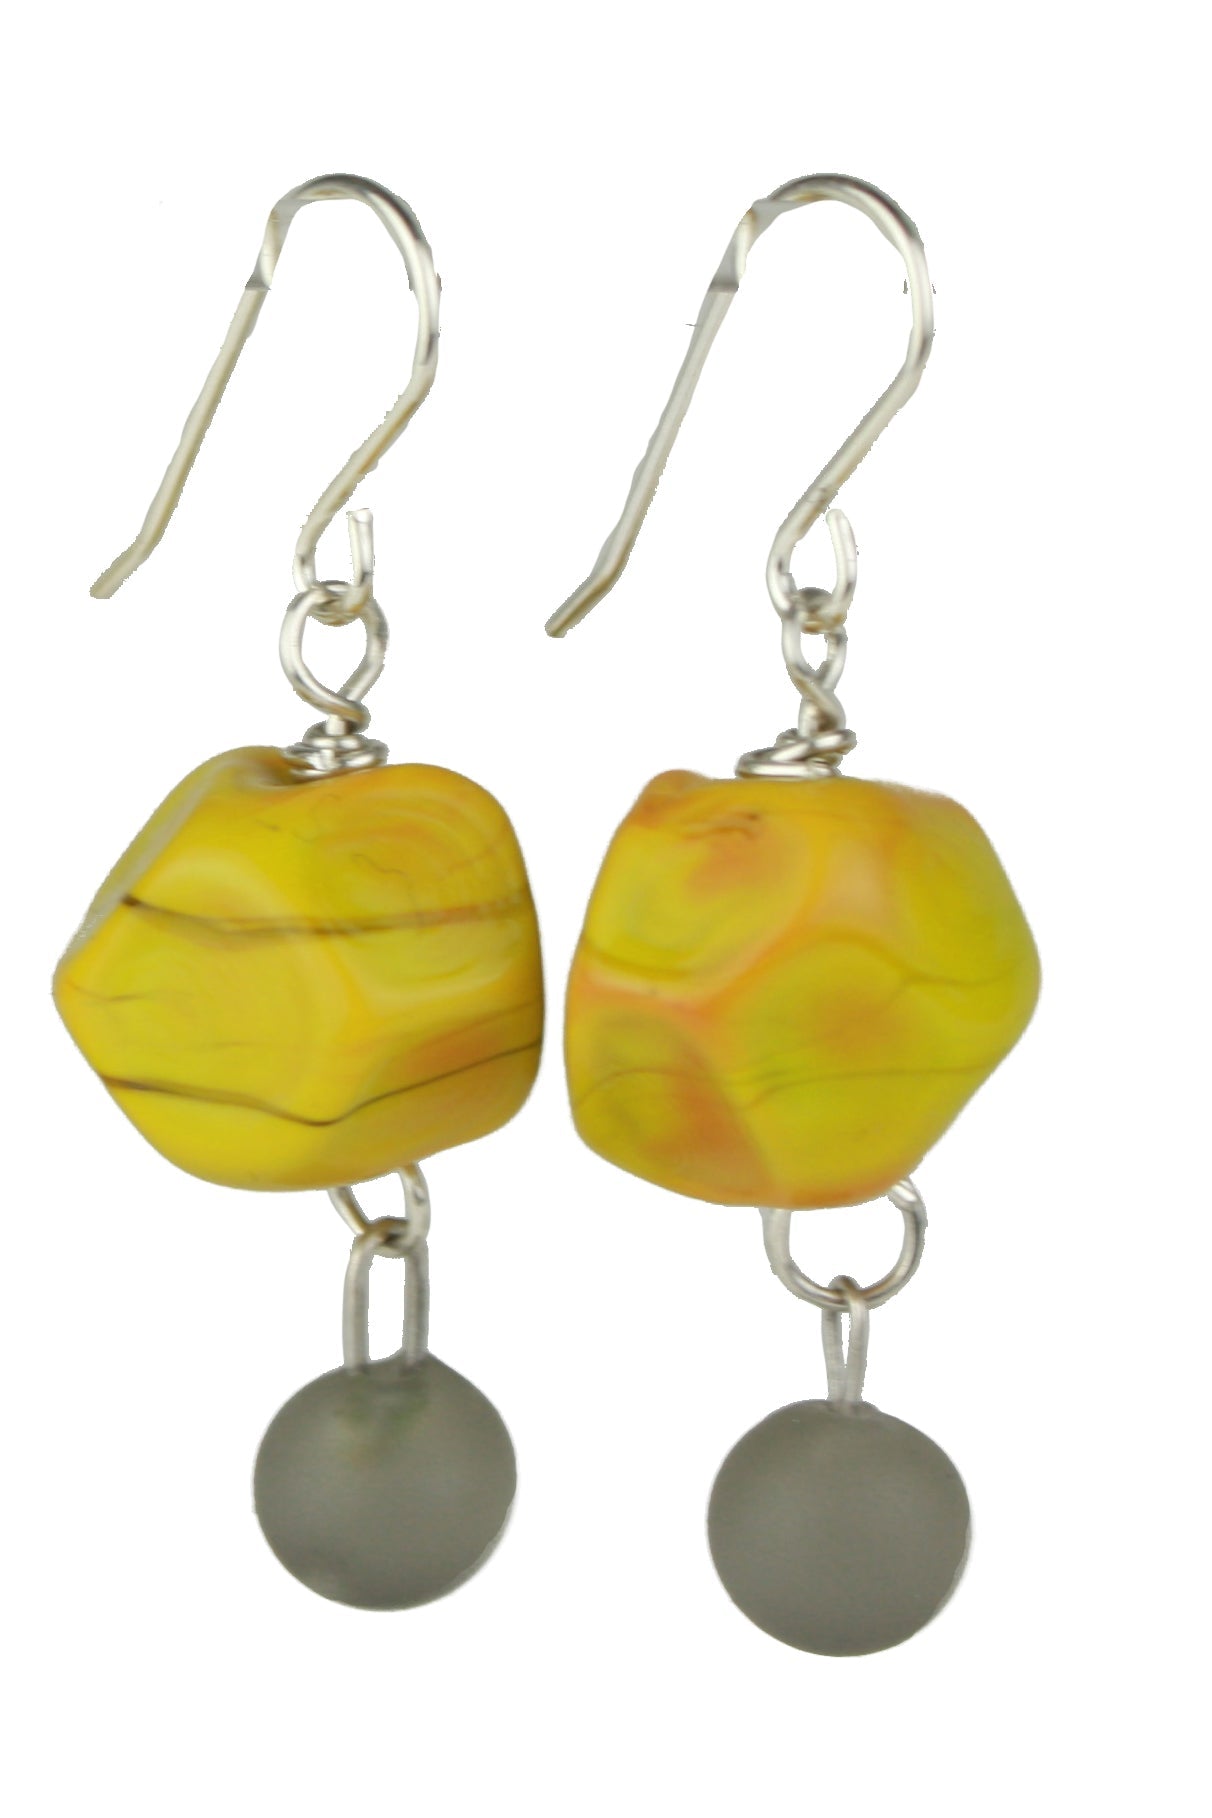 Nugget earrings featuring hand crafted ochre yellow glass hand faceted beads with a small grey glass charm